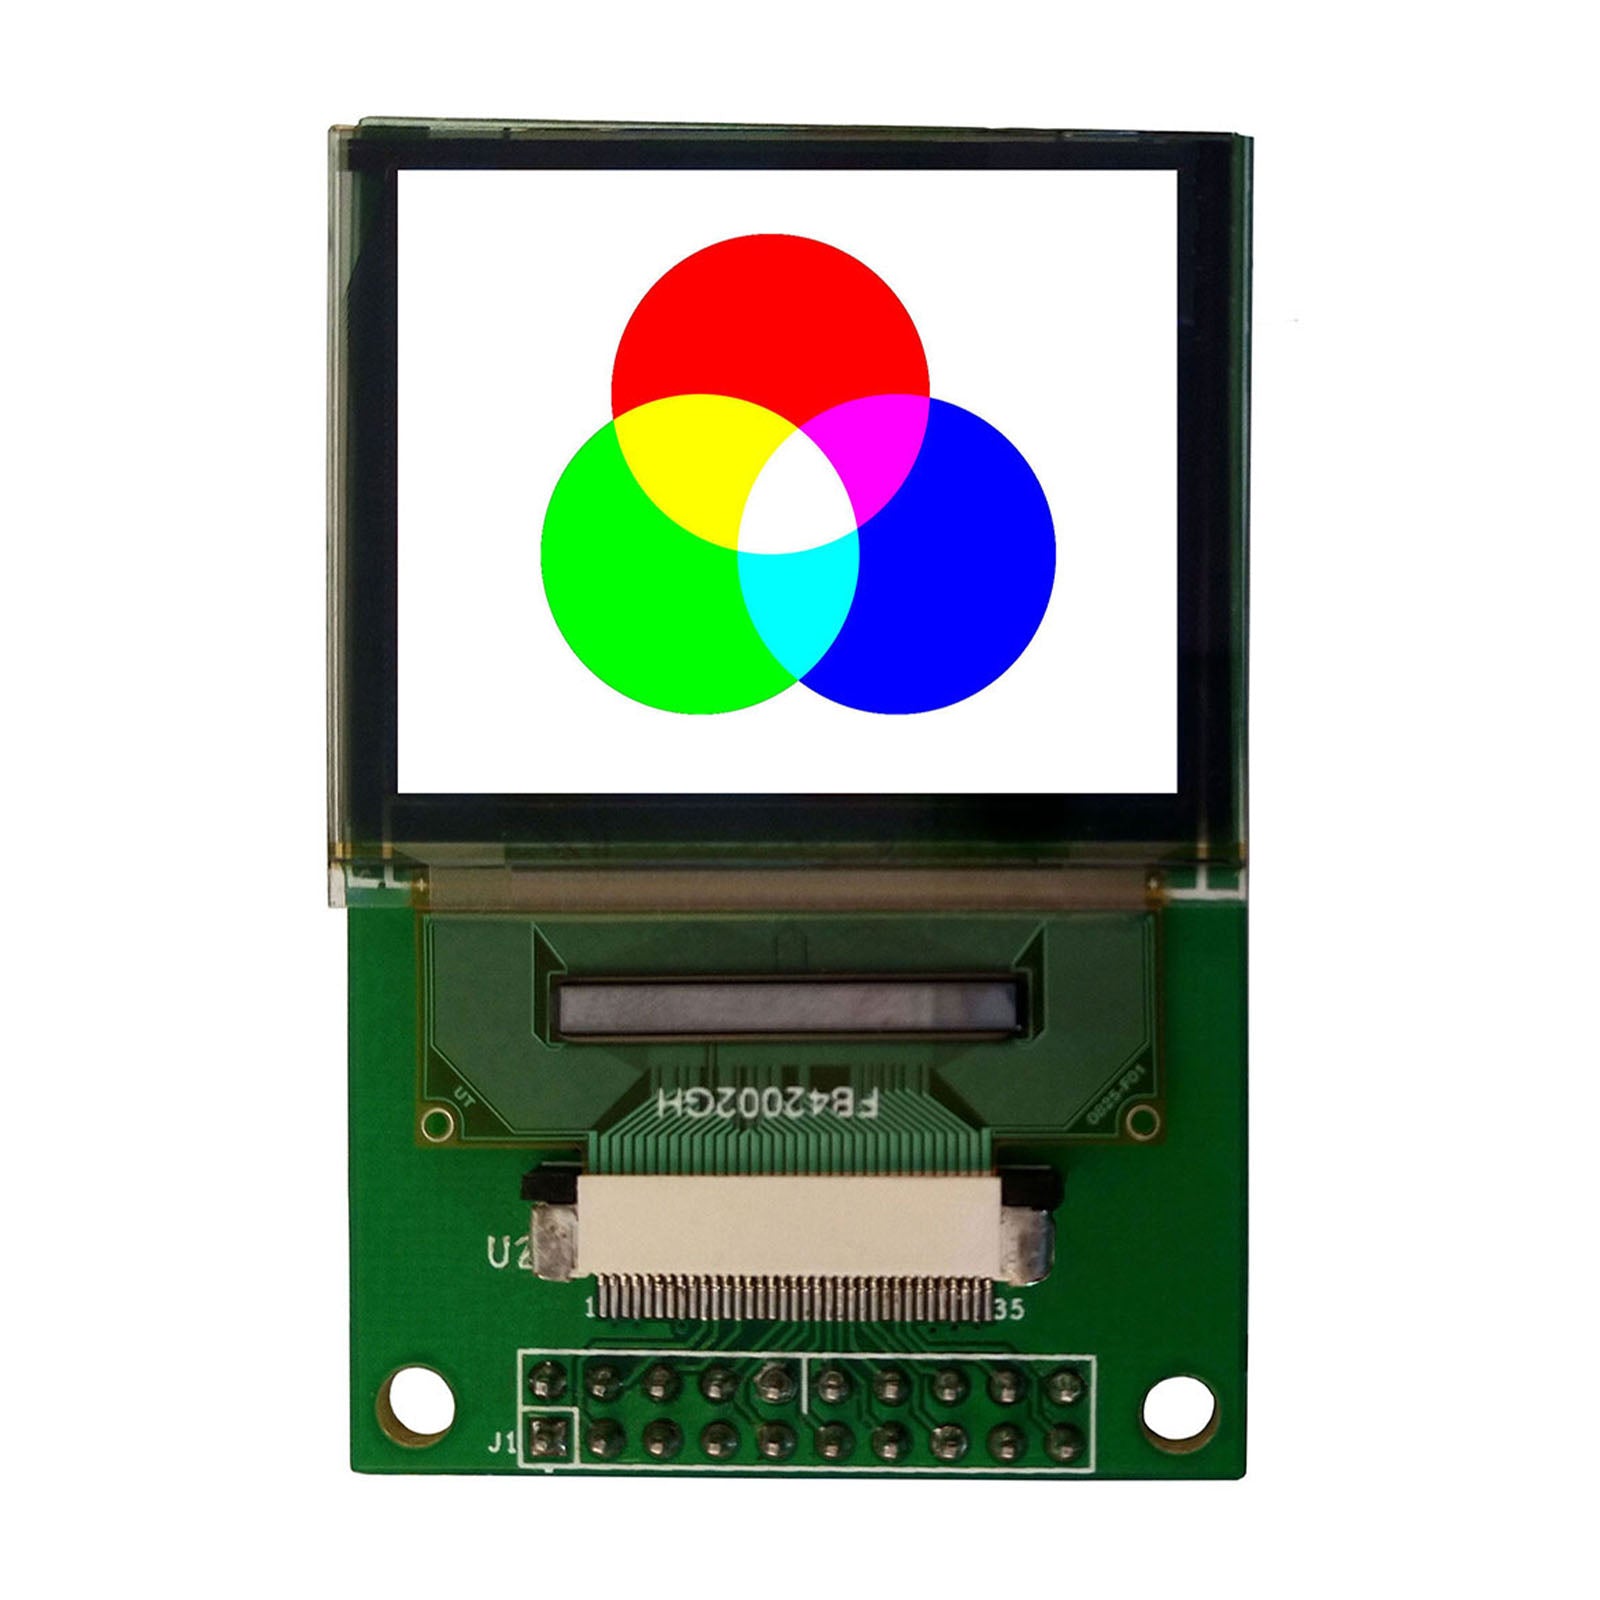 1.69-inch OLED image display screen showing the three primary colors: red, yellow, and blue